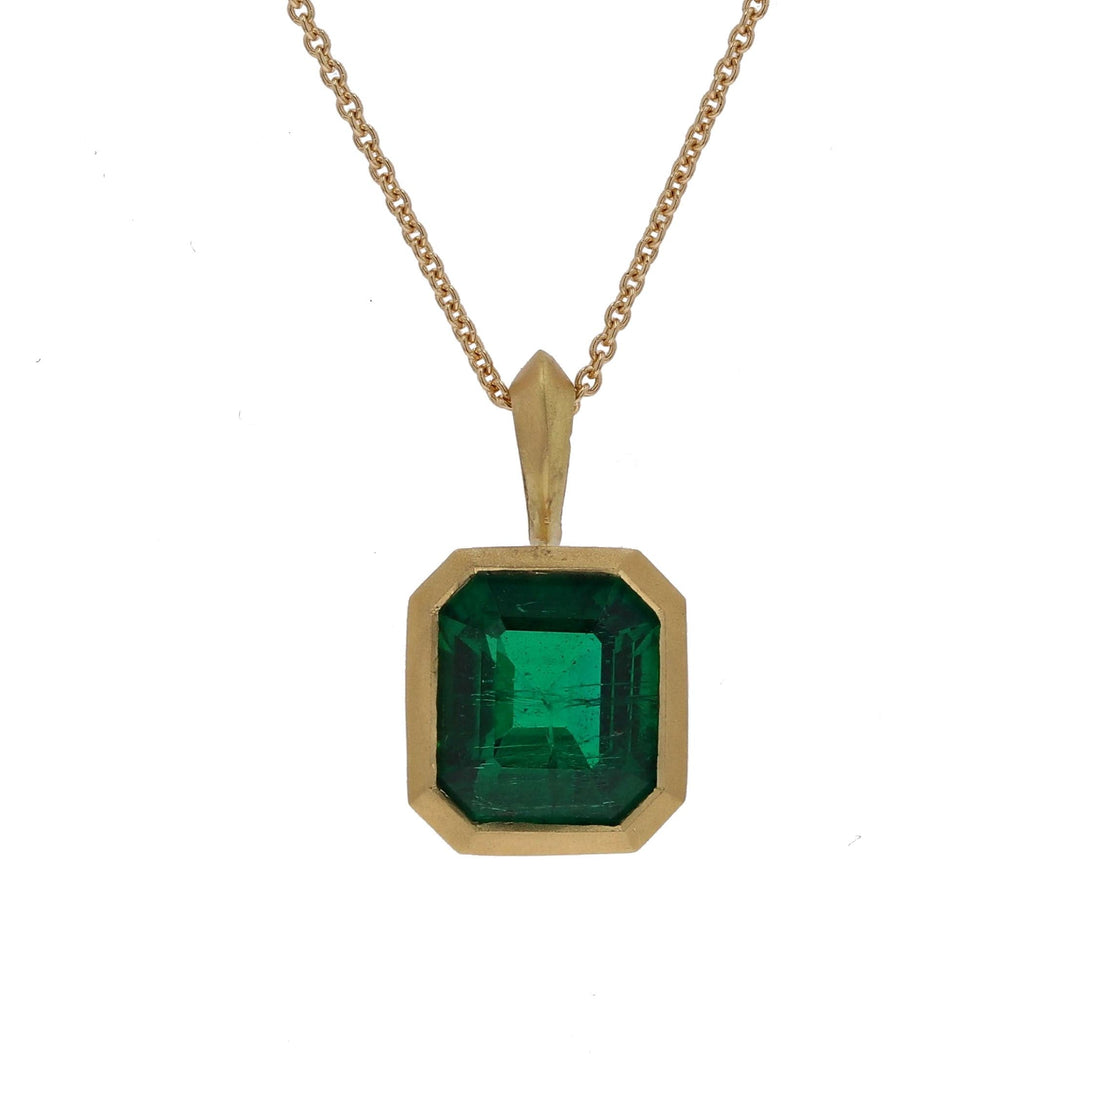 Yellow Gold Emerald Cut Emerald Pendant Necklace - Skeie's Jewelers